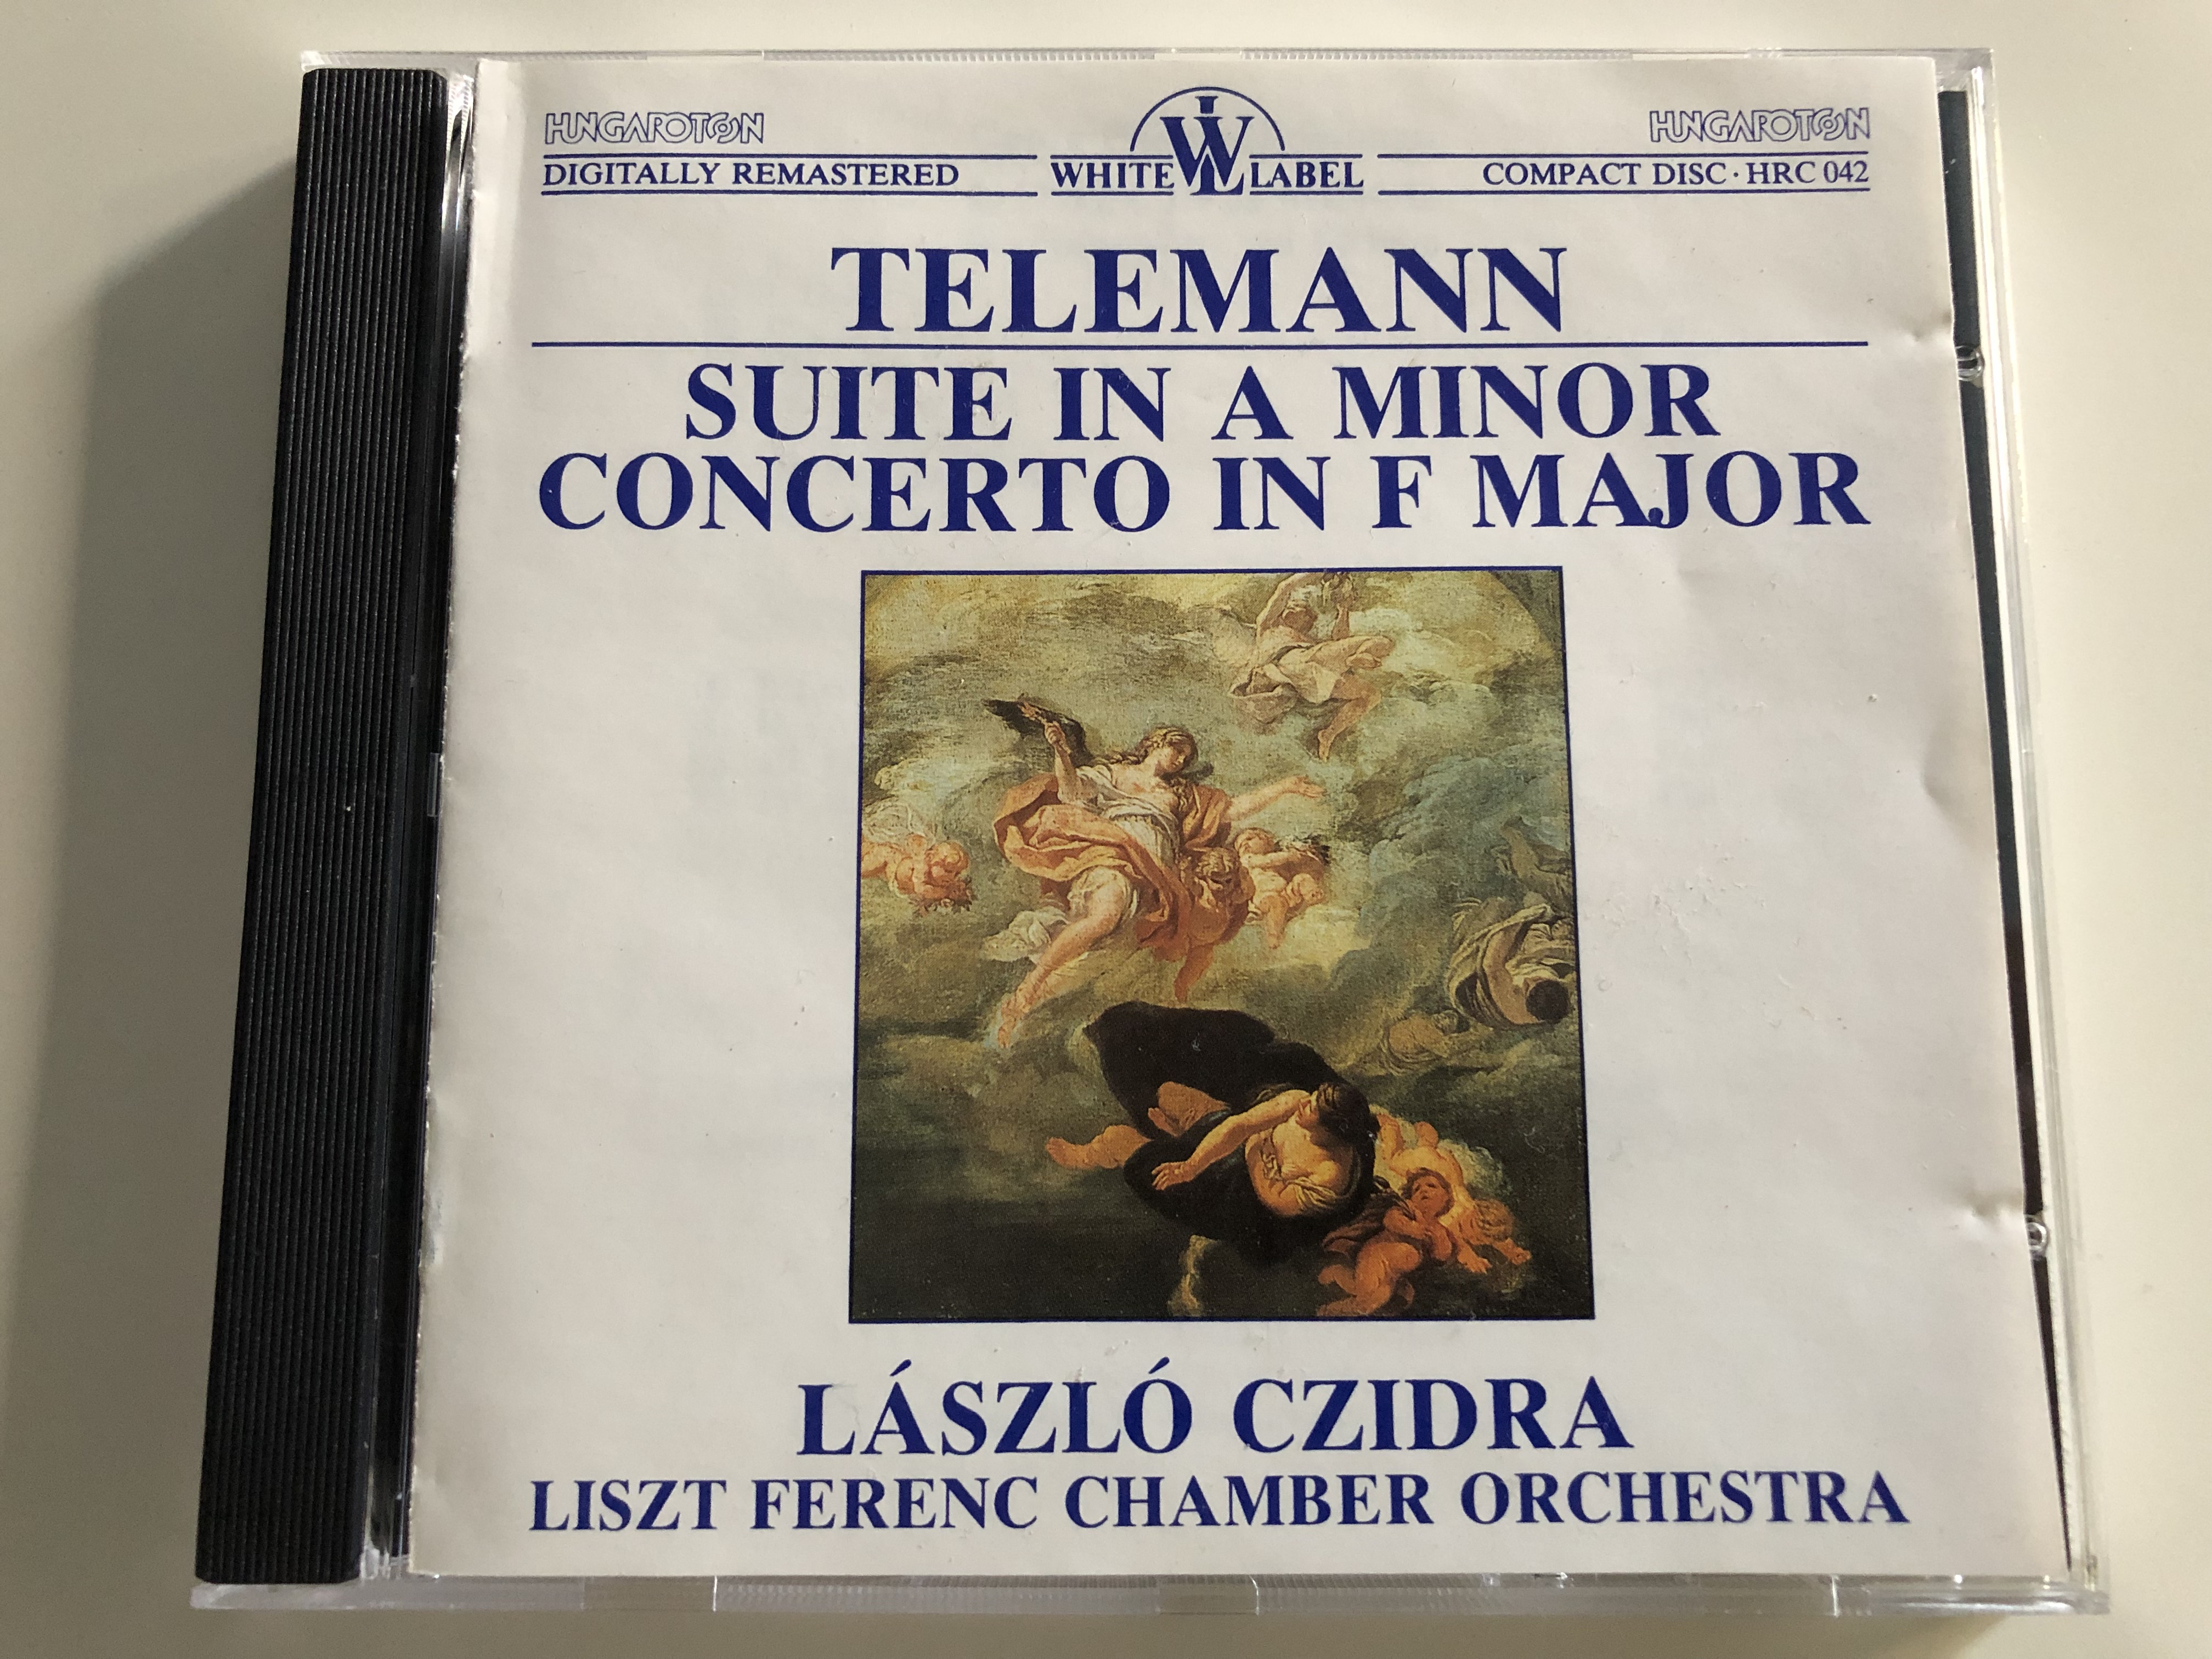 telemann-suite-in-a-minor-concerto-in-f-major-l-szl-czidra-recorder-j-zsef-vajda-basson-liszt-ferenc-chamber-orchestra-conducted-by-j-nos-rolla-hungaroton-white-label-hrc-042-audio-cd-1980-2-.jpg